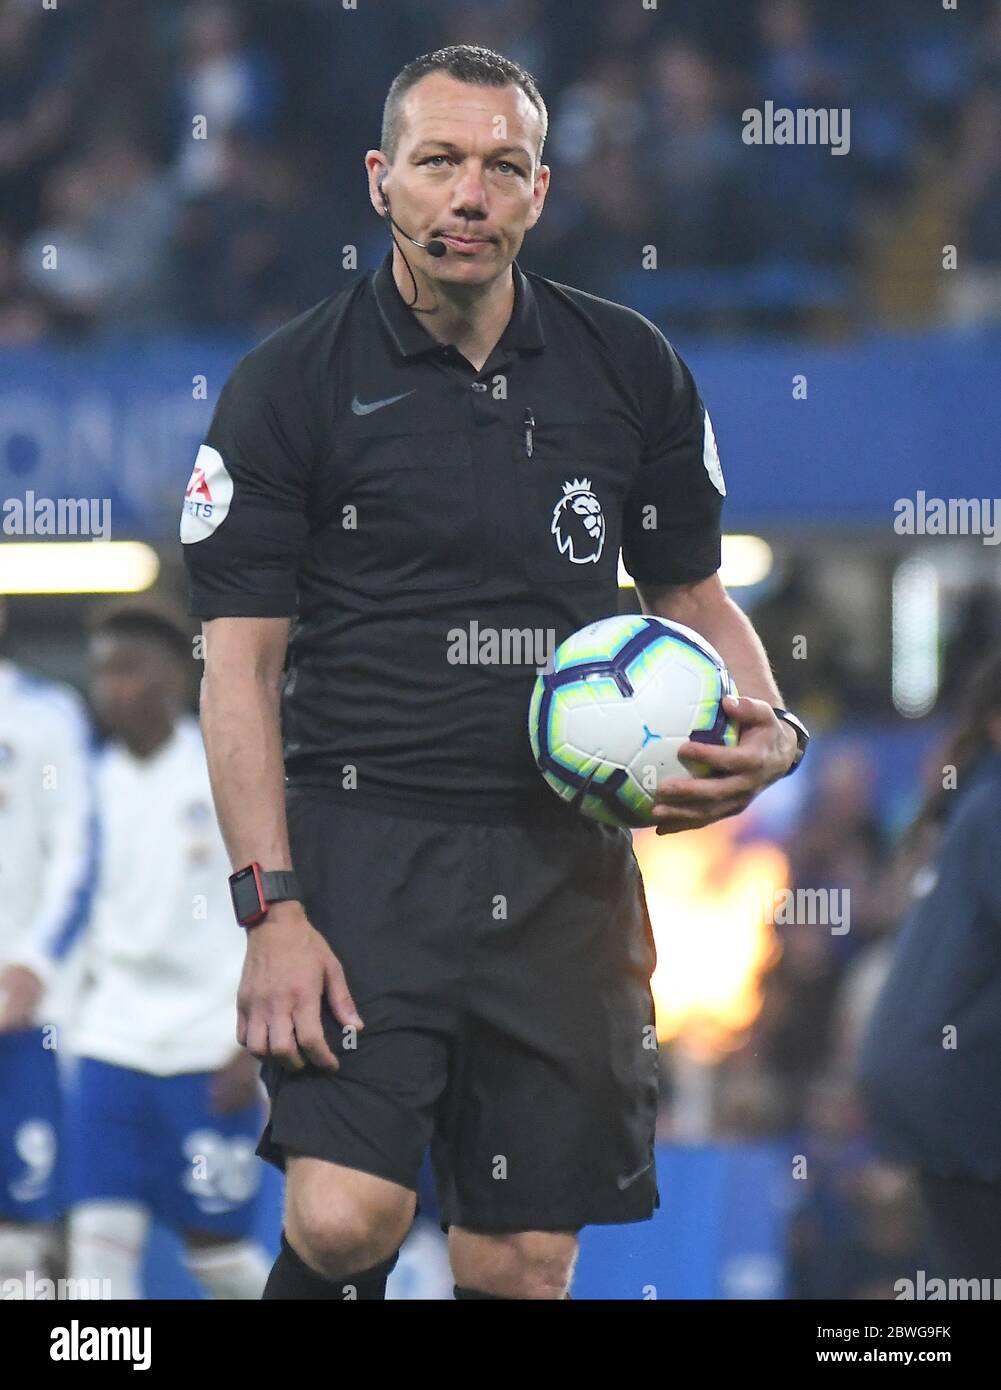 LONDON, ENGLAND - APRIL 22, 2019: English referee Kevin Friend pictured ahead of the 2018/19 Premier League game between Chelsea FC and Burnley FC at Stock Photo